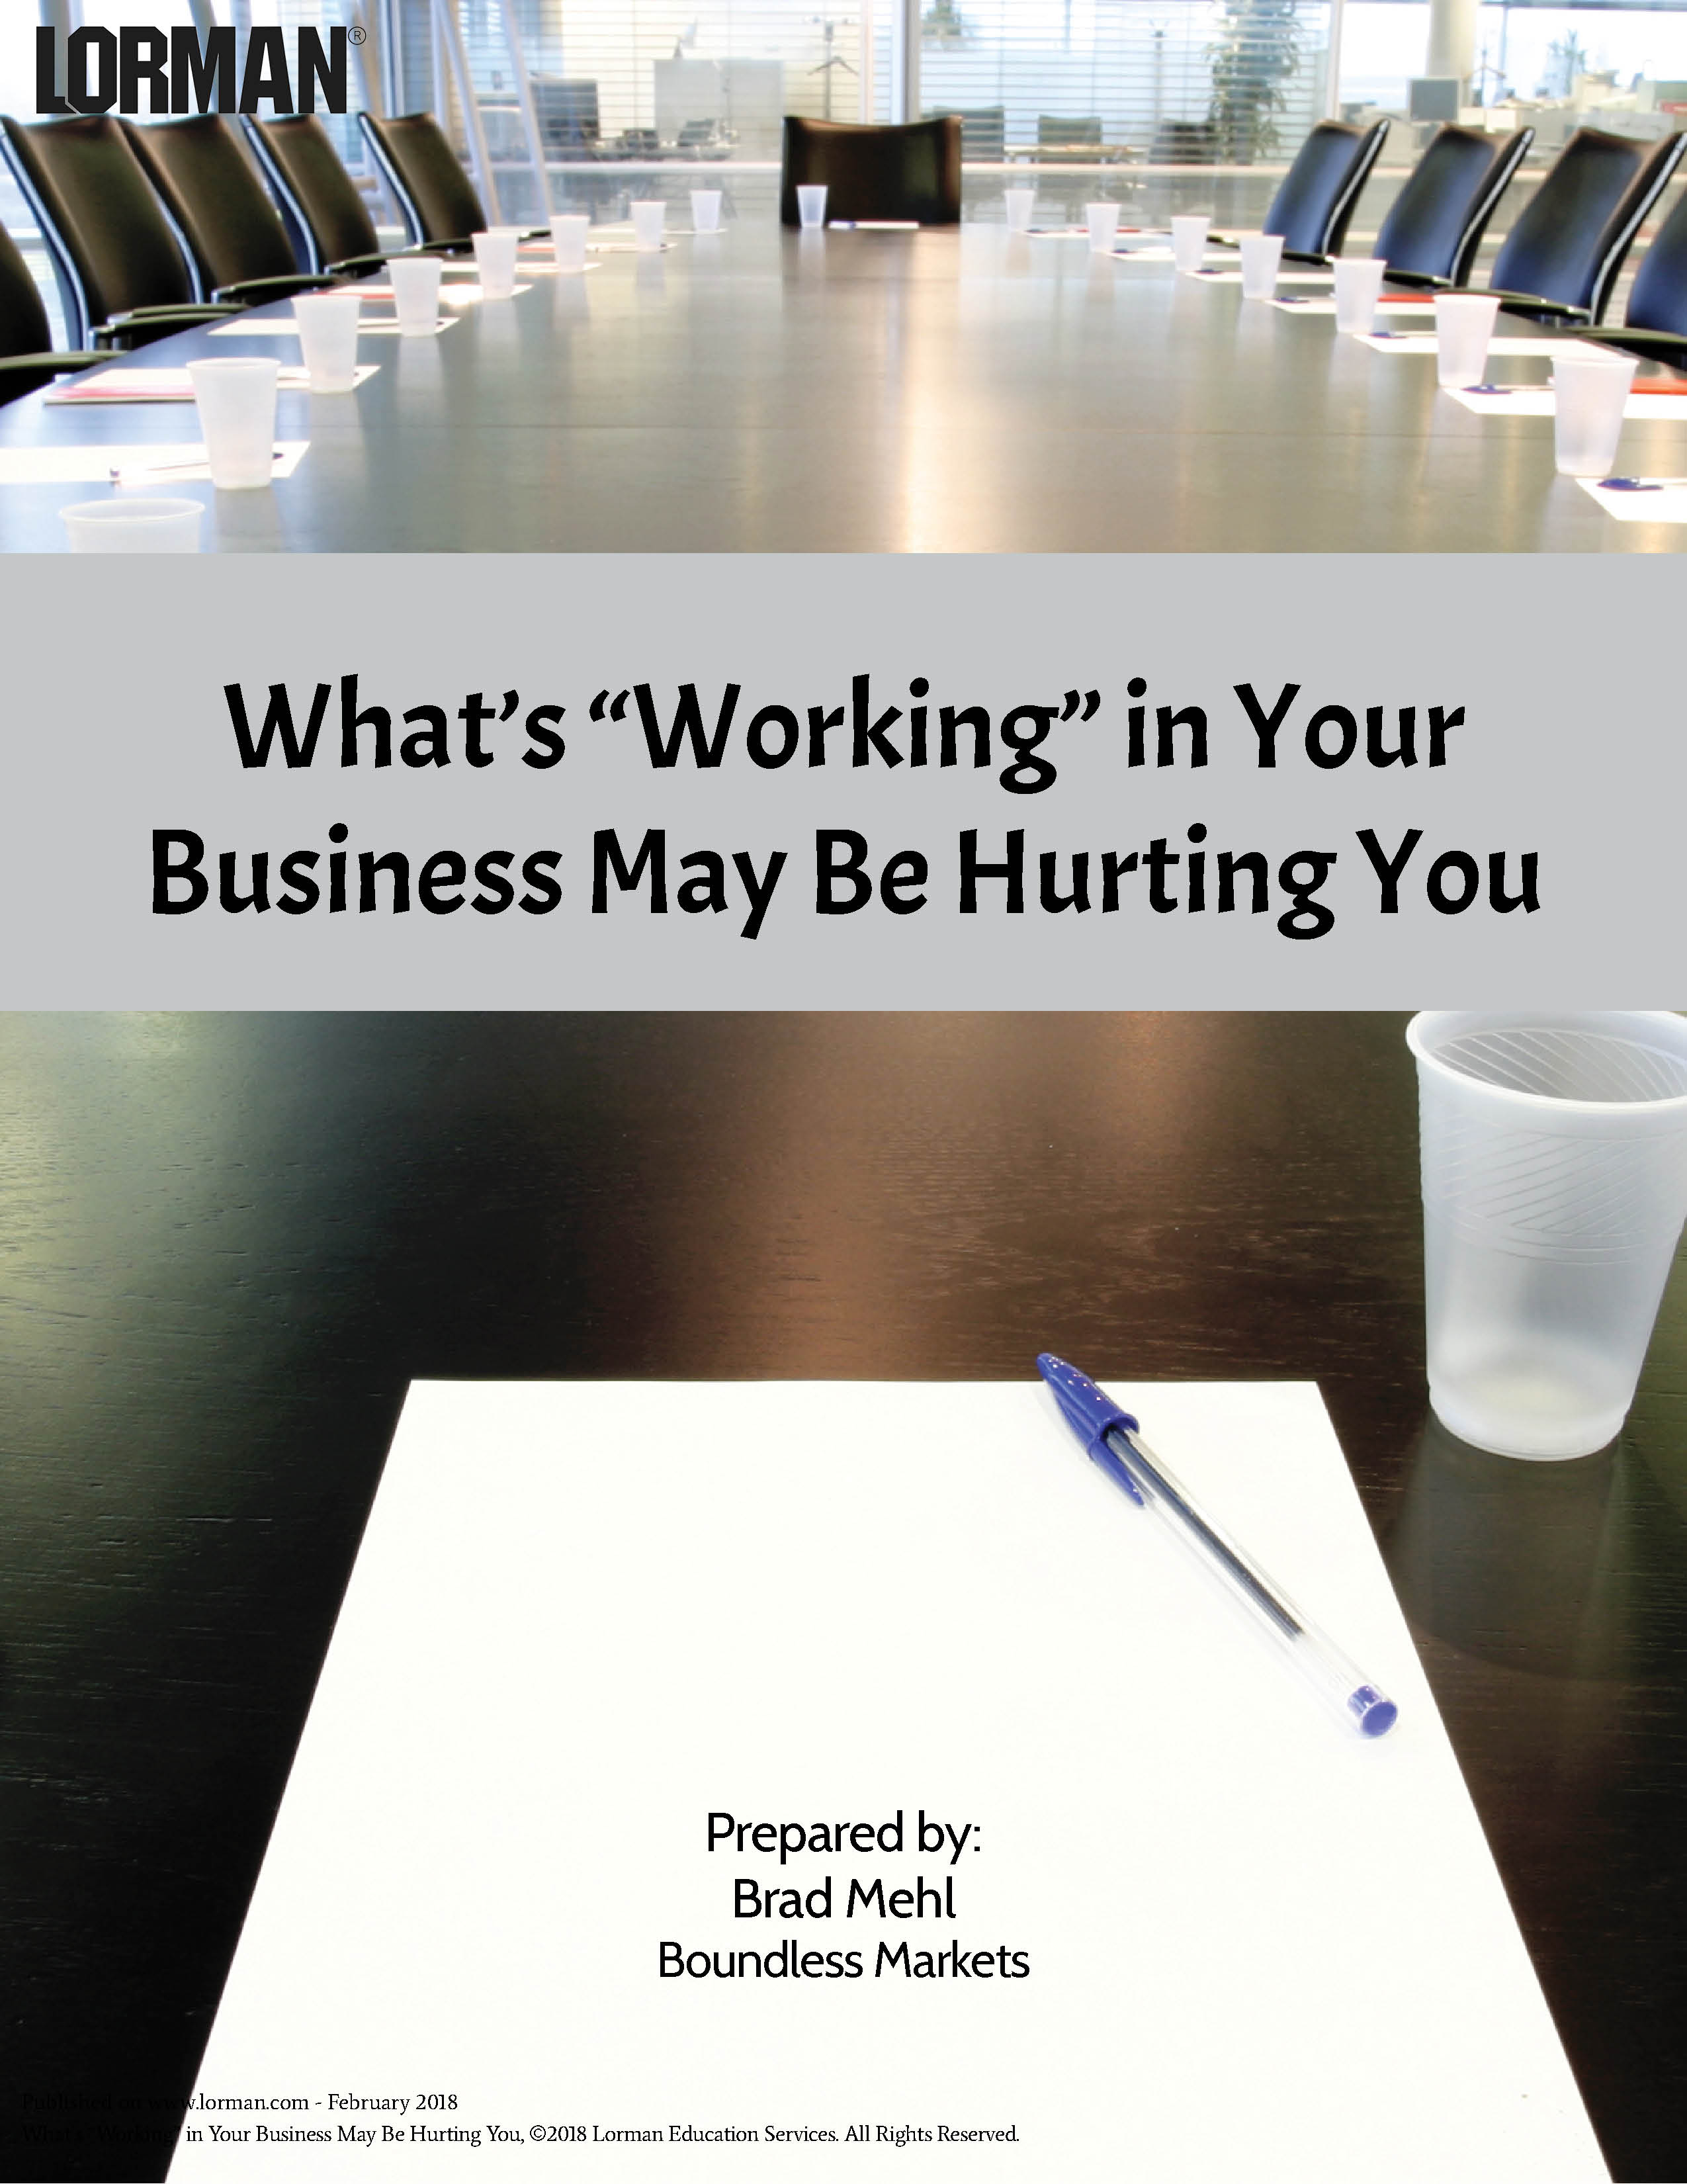 What’s “Working” in Your Business May Be Hurting You